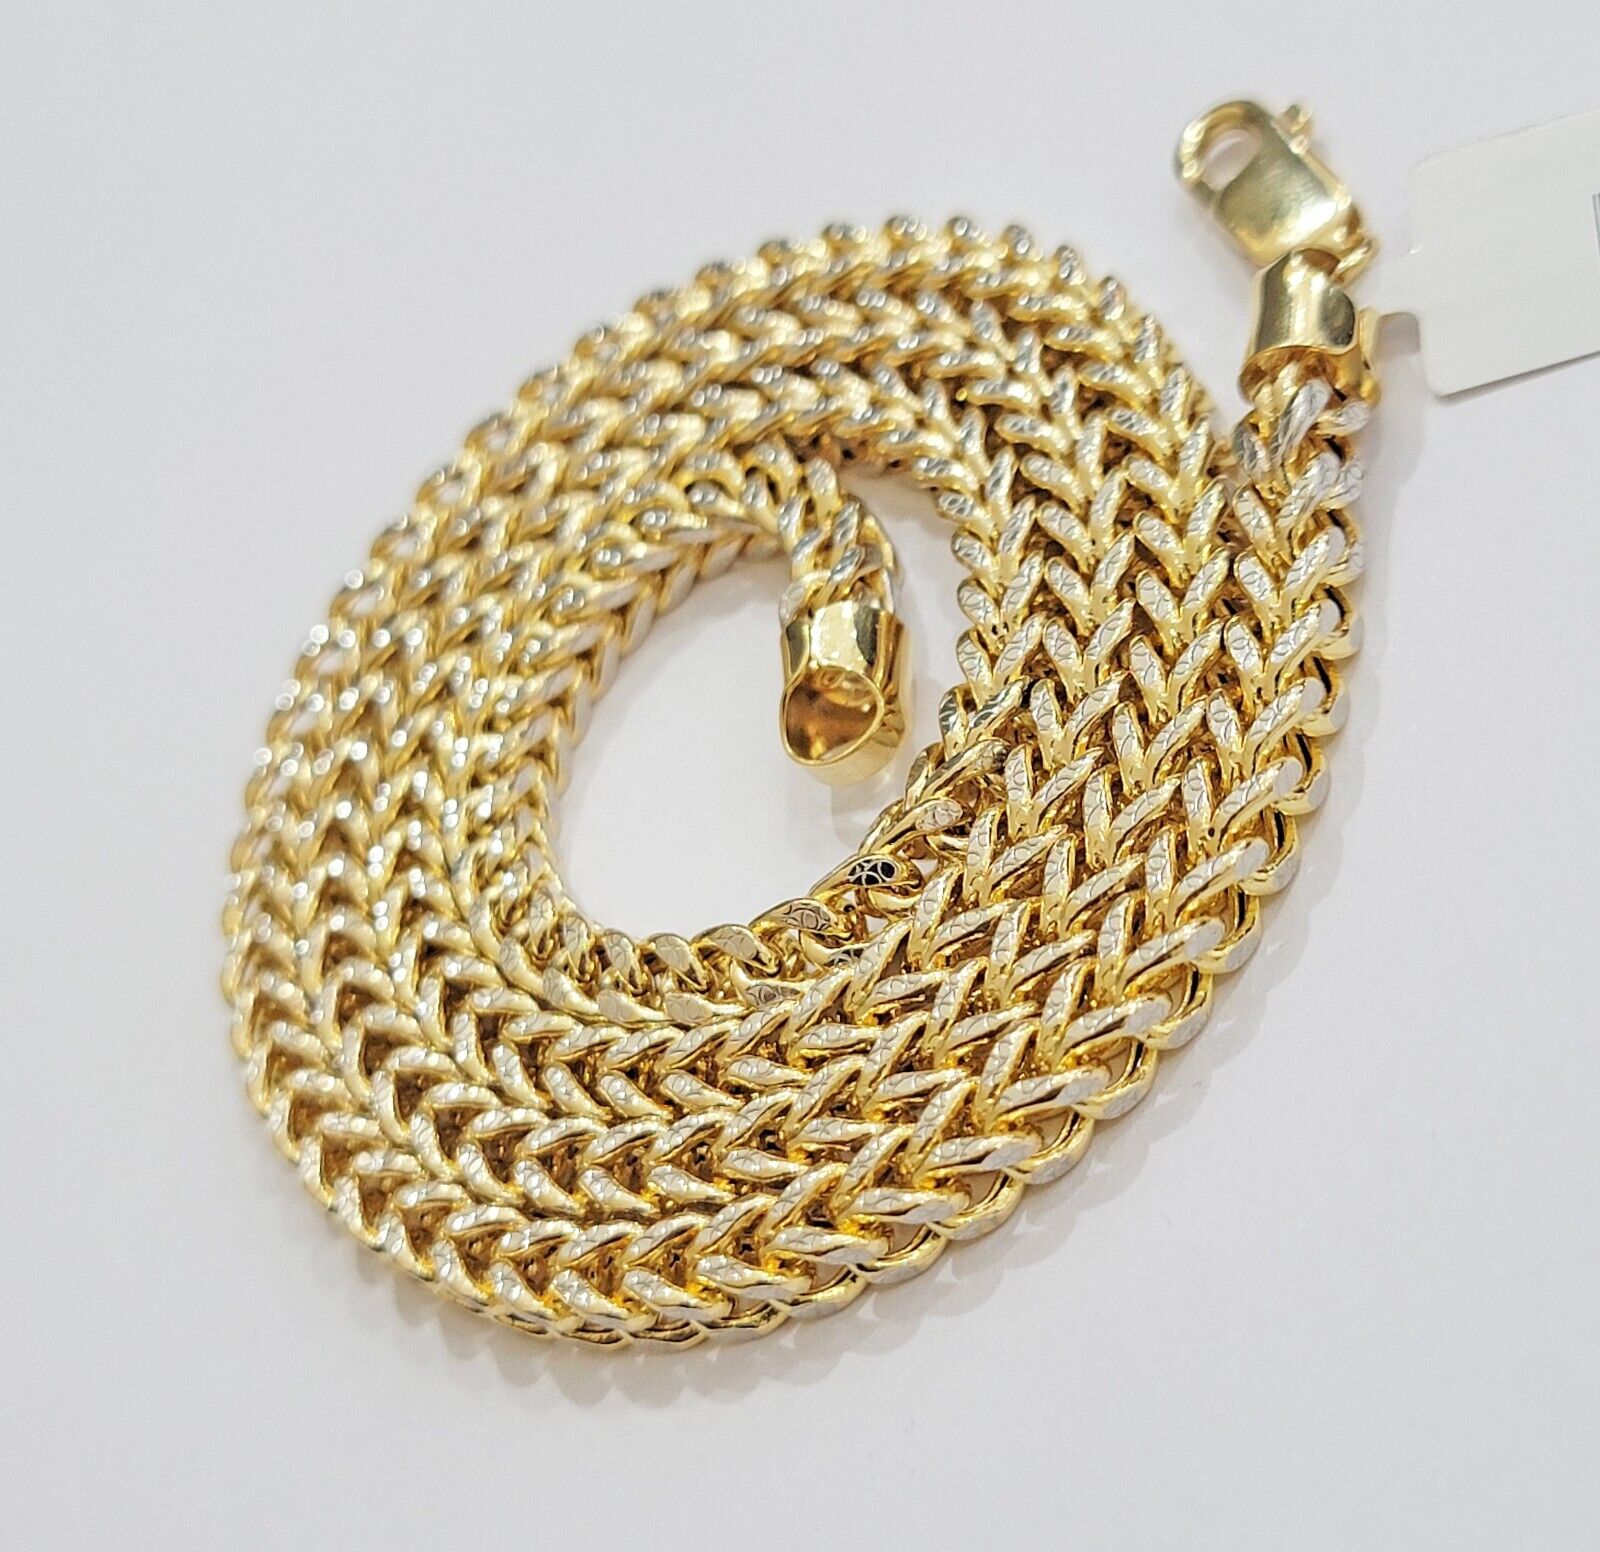 Well made and adorable solid 14 karat gold grooved cylinder ash necklaces